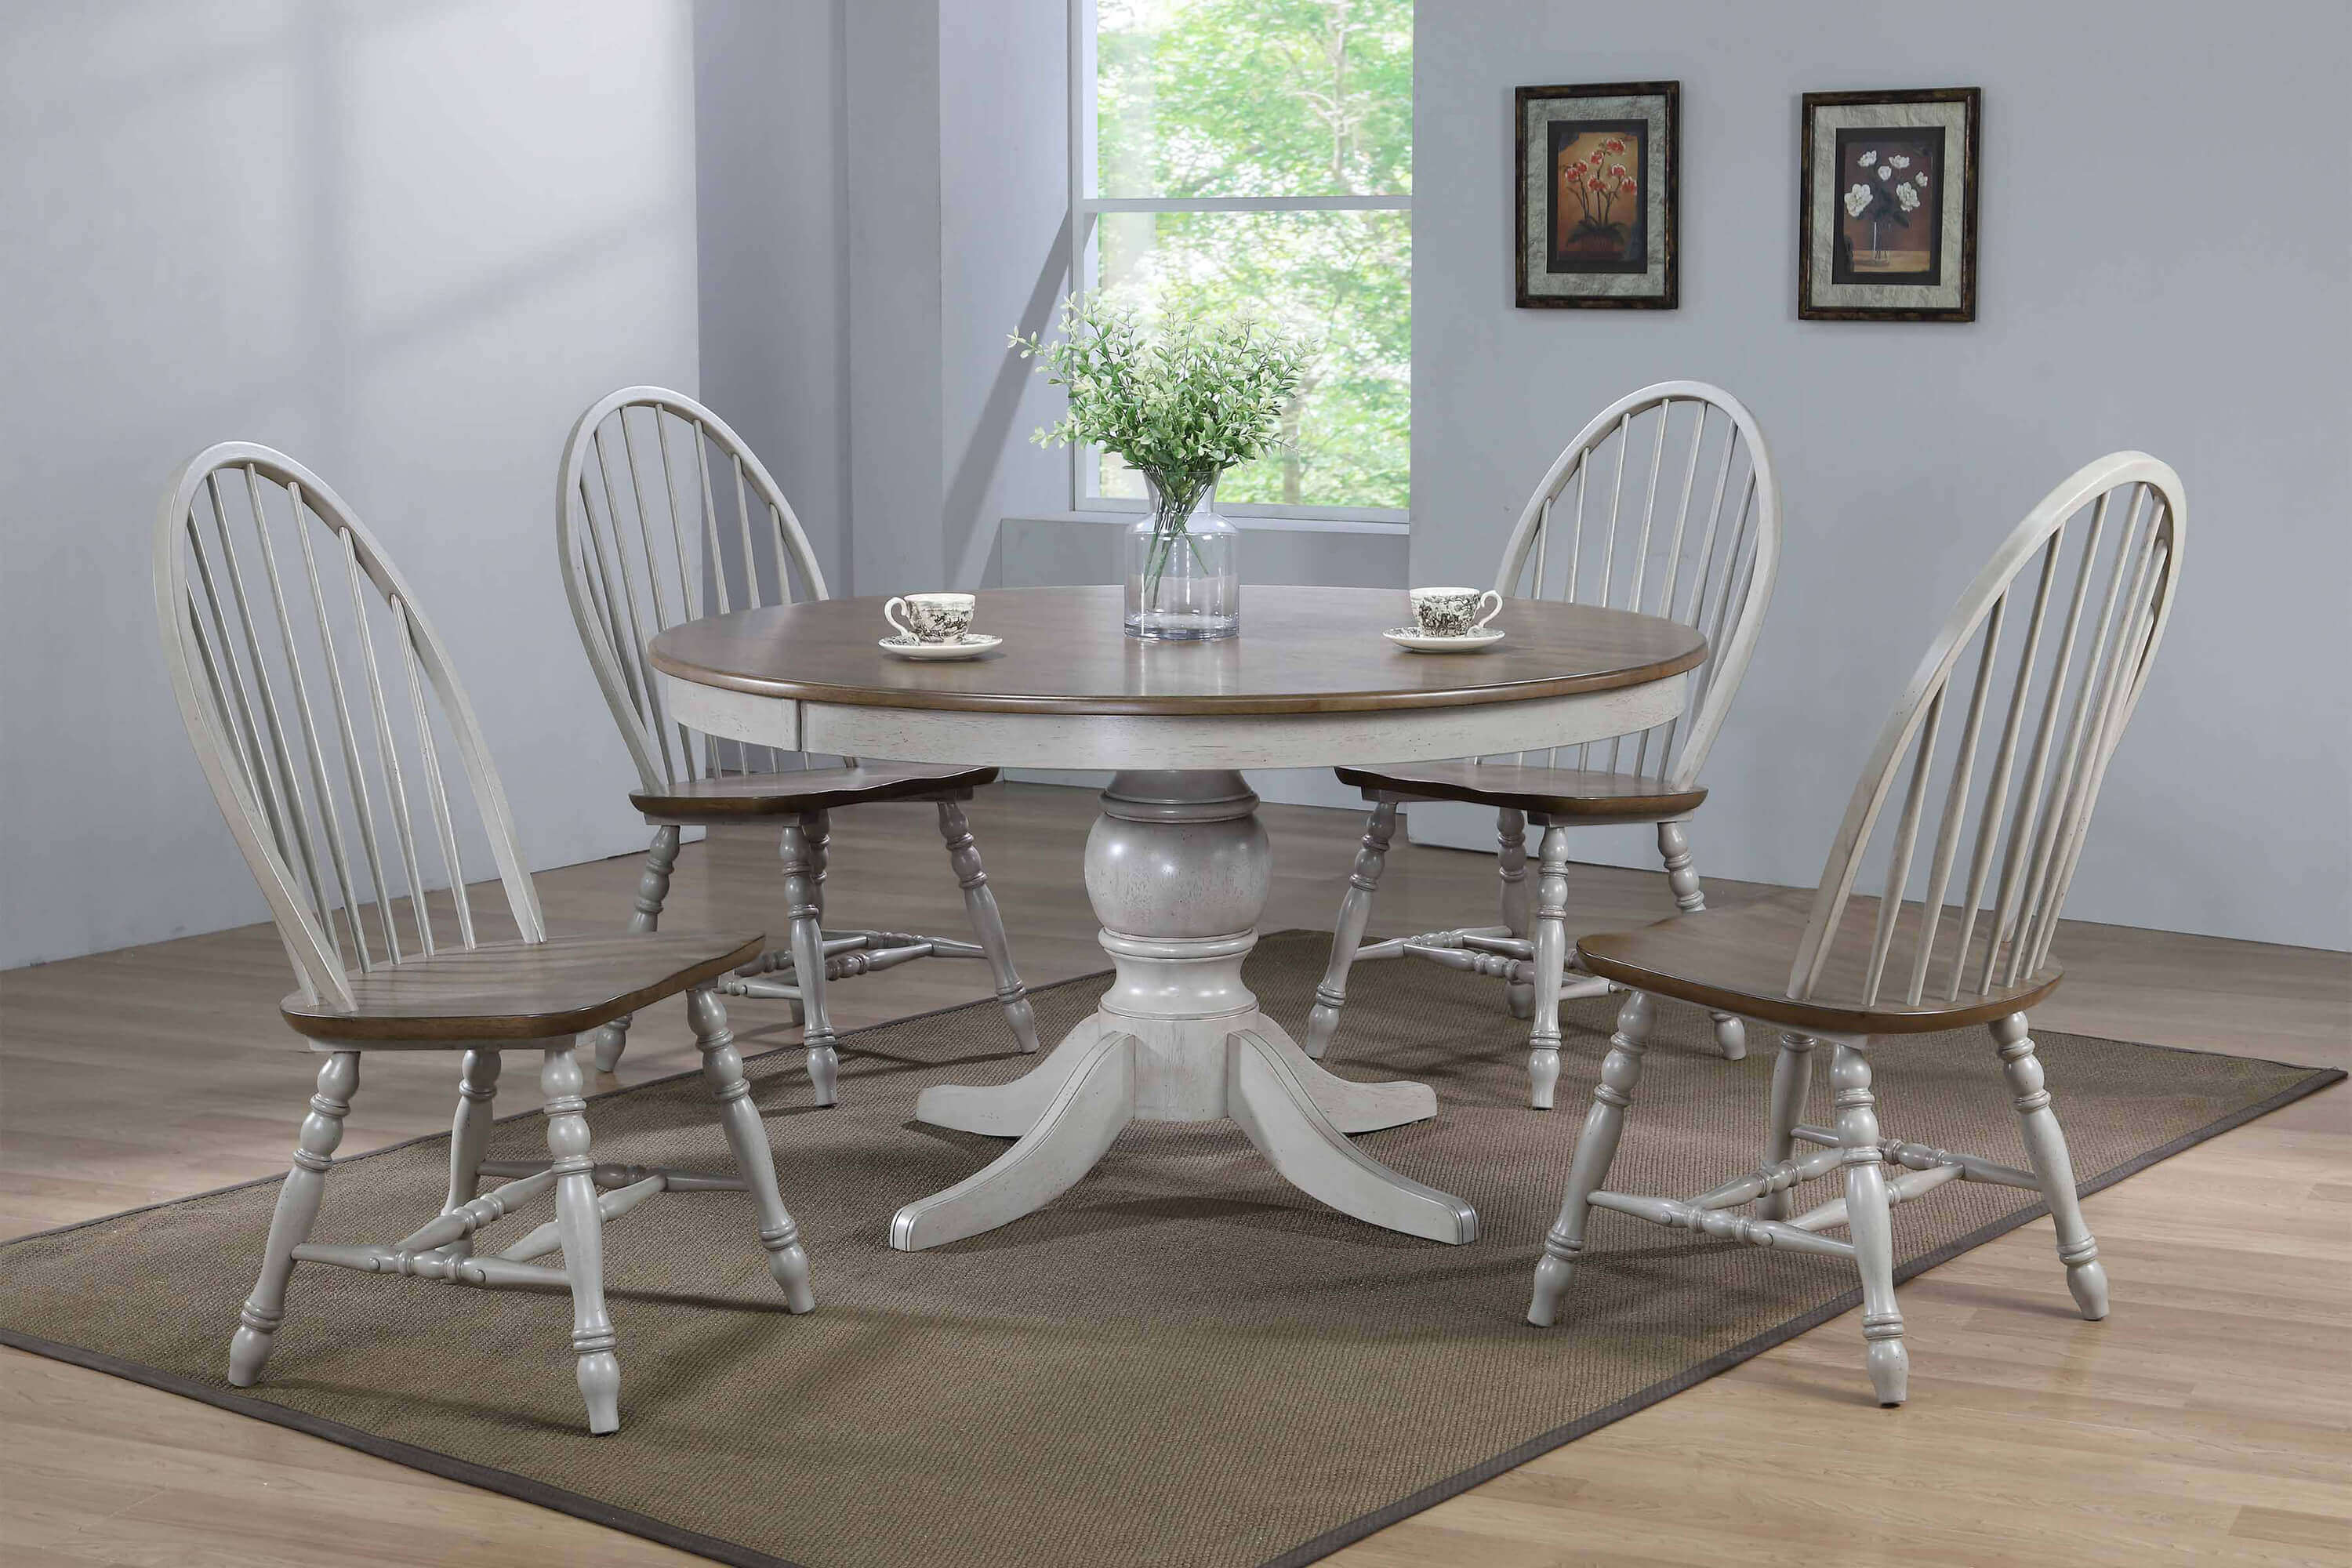 Jack Round Pedastal Dining Table Set, Round Pedestal Table And Chairs Set